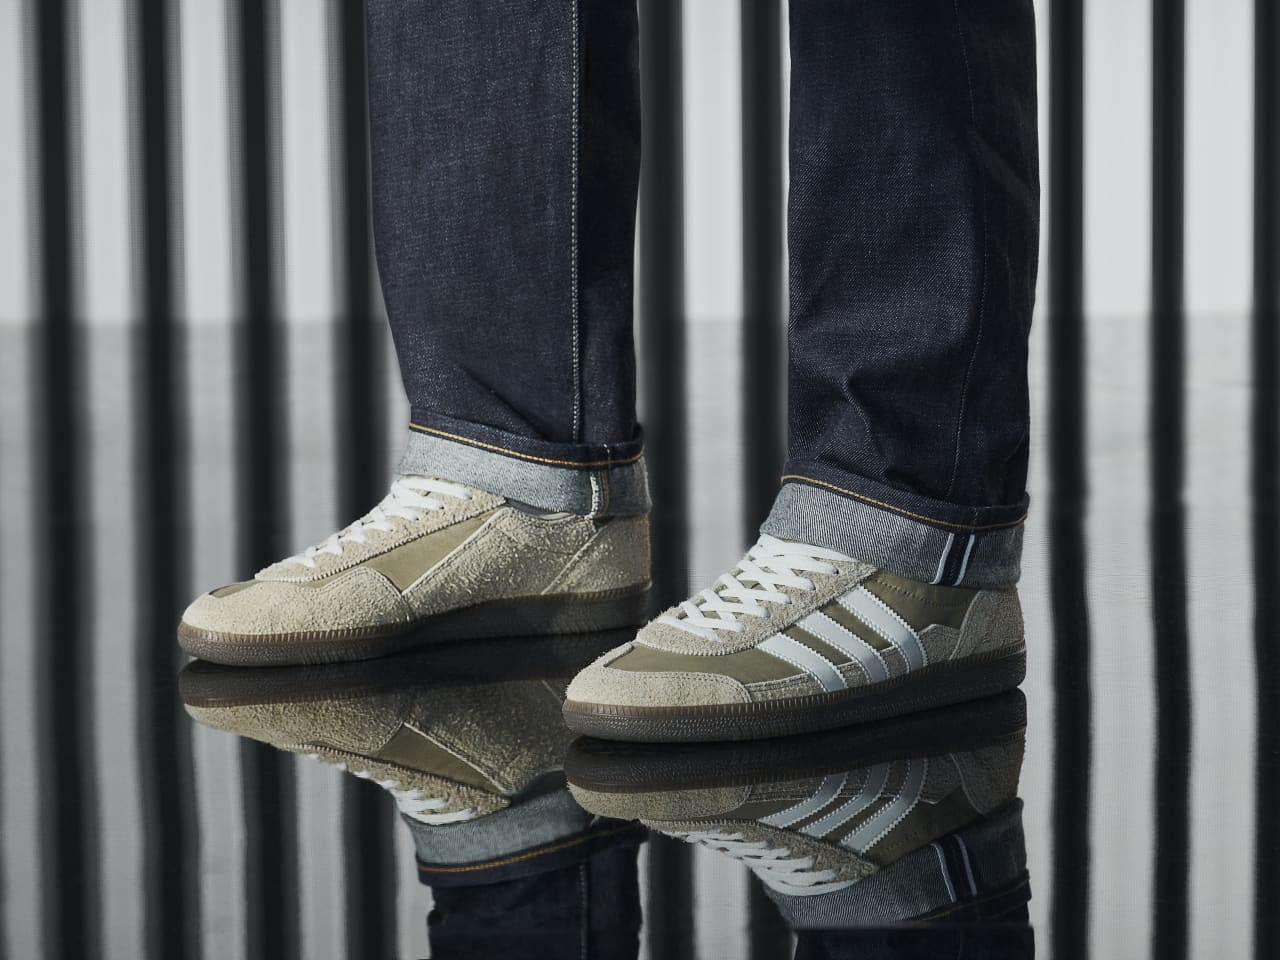 Adidas wins double upgrade at Morgan Stanley, thanks to ‘Spezial’ and other shoes